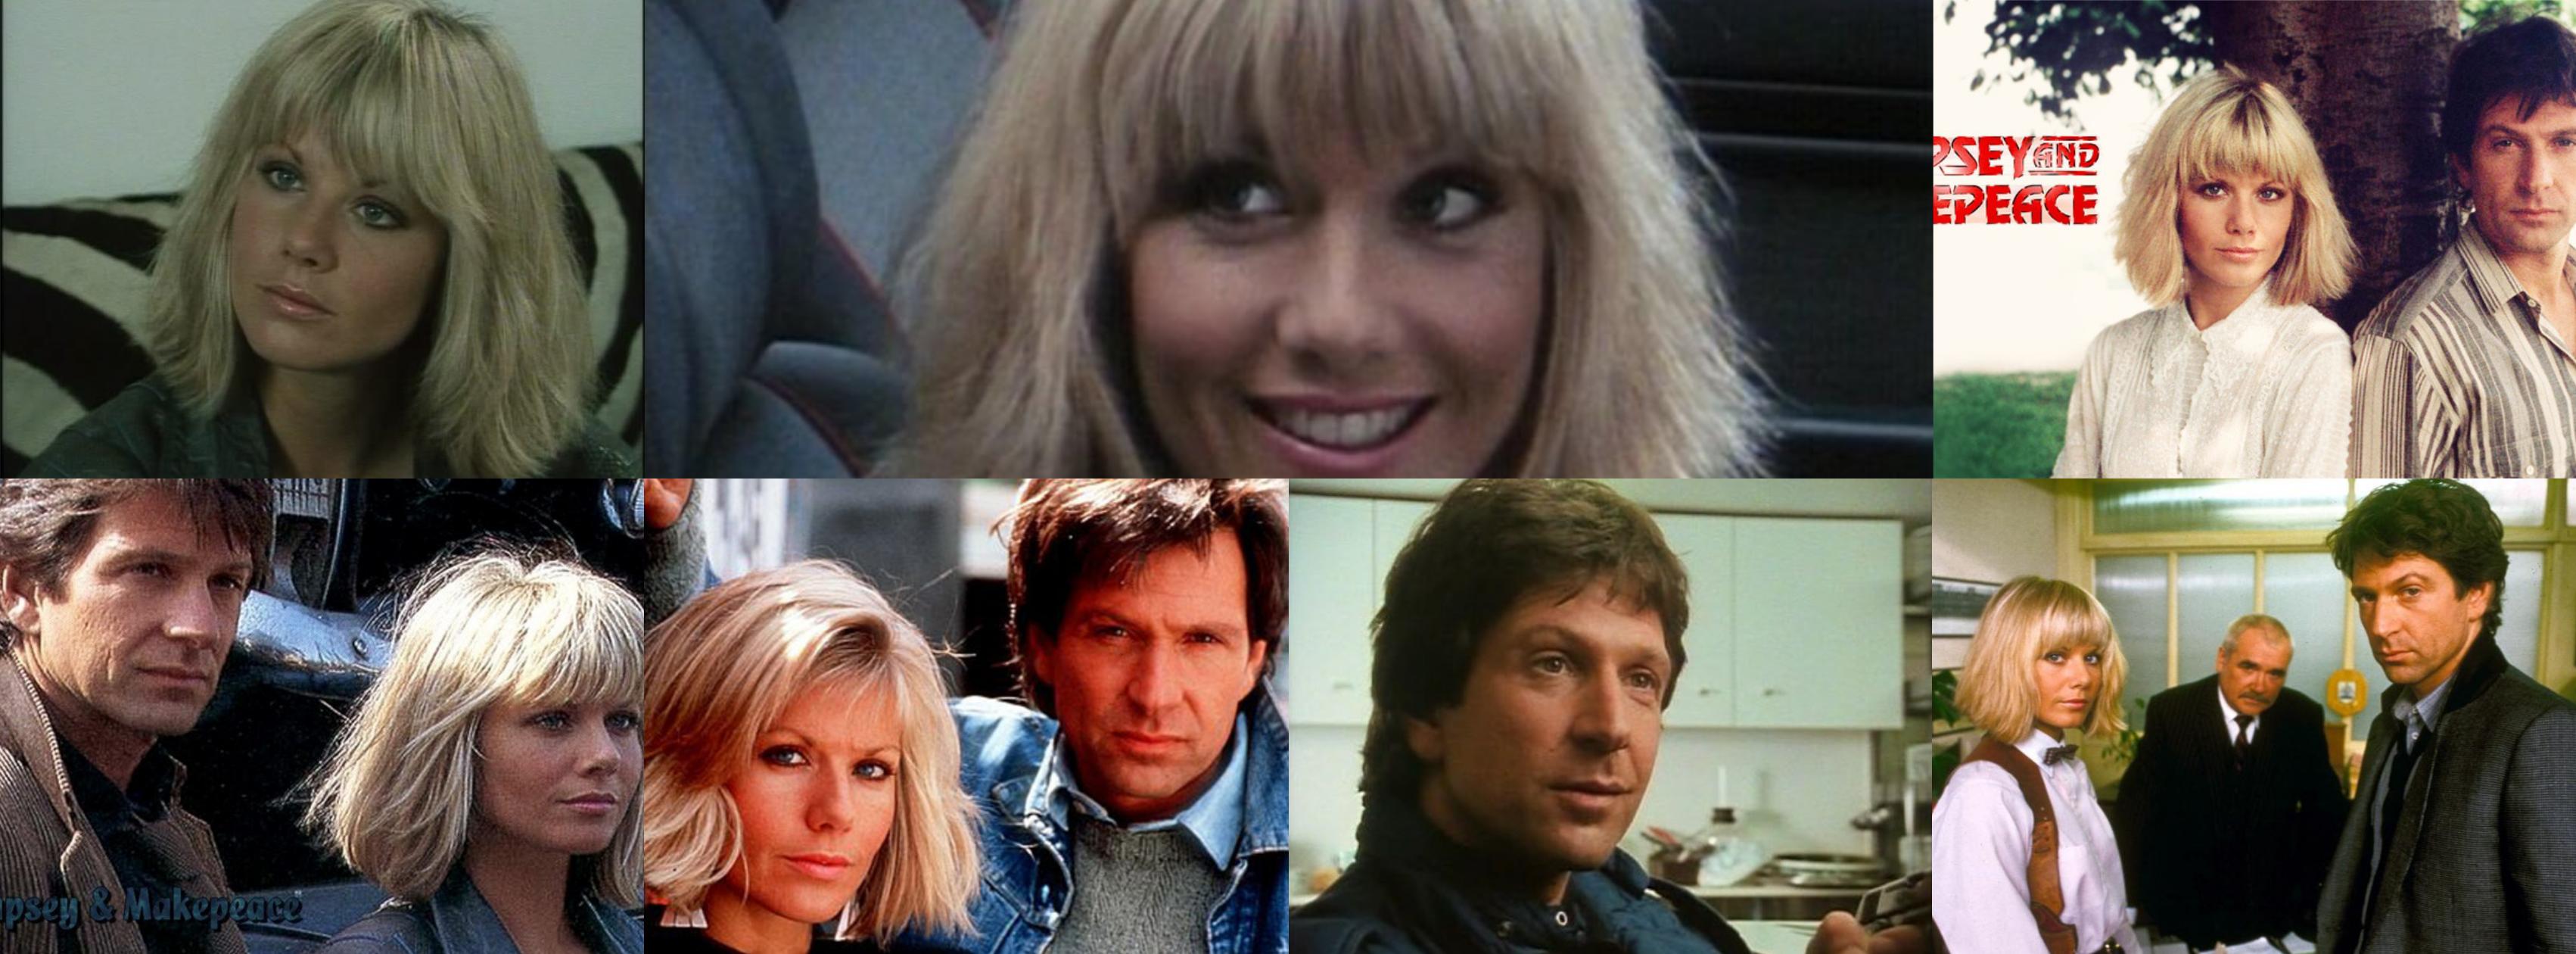 dempsey and makepeace